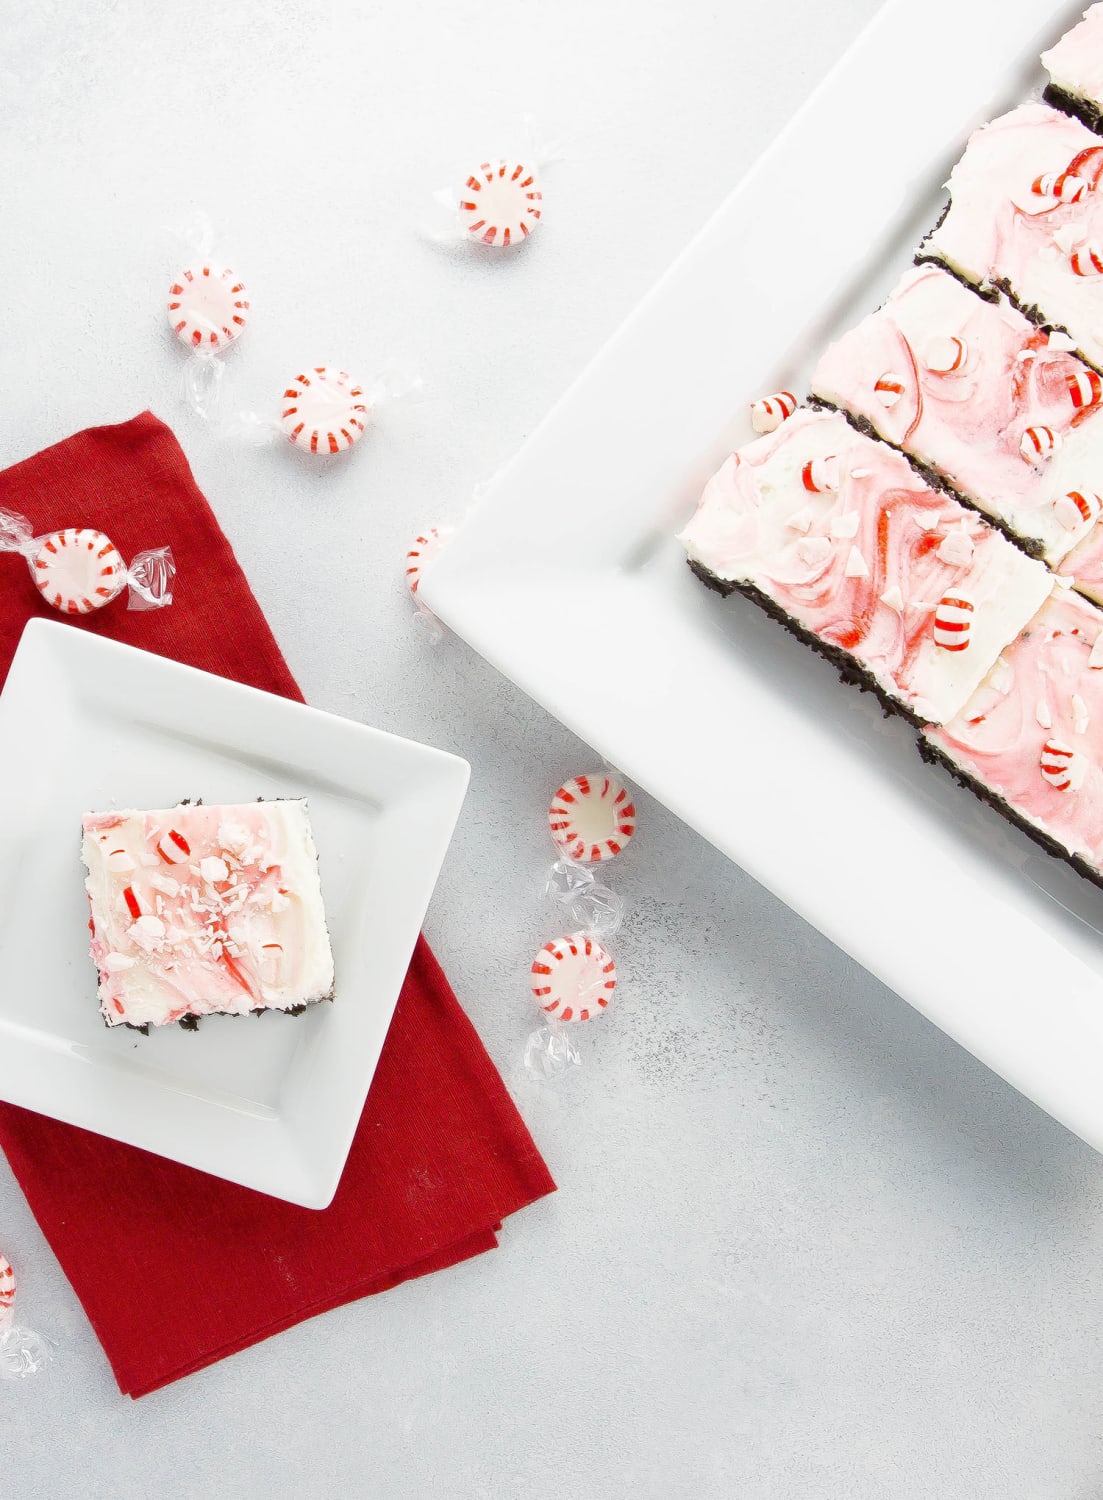 Peppermint Pattie Brownies: The Perfect Christmas Brownie